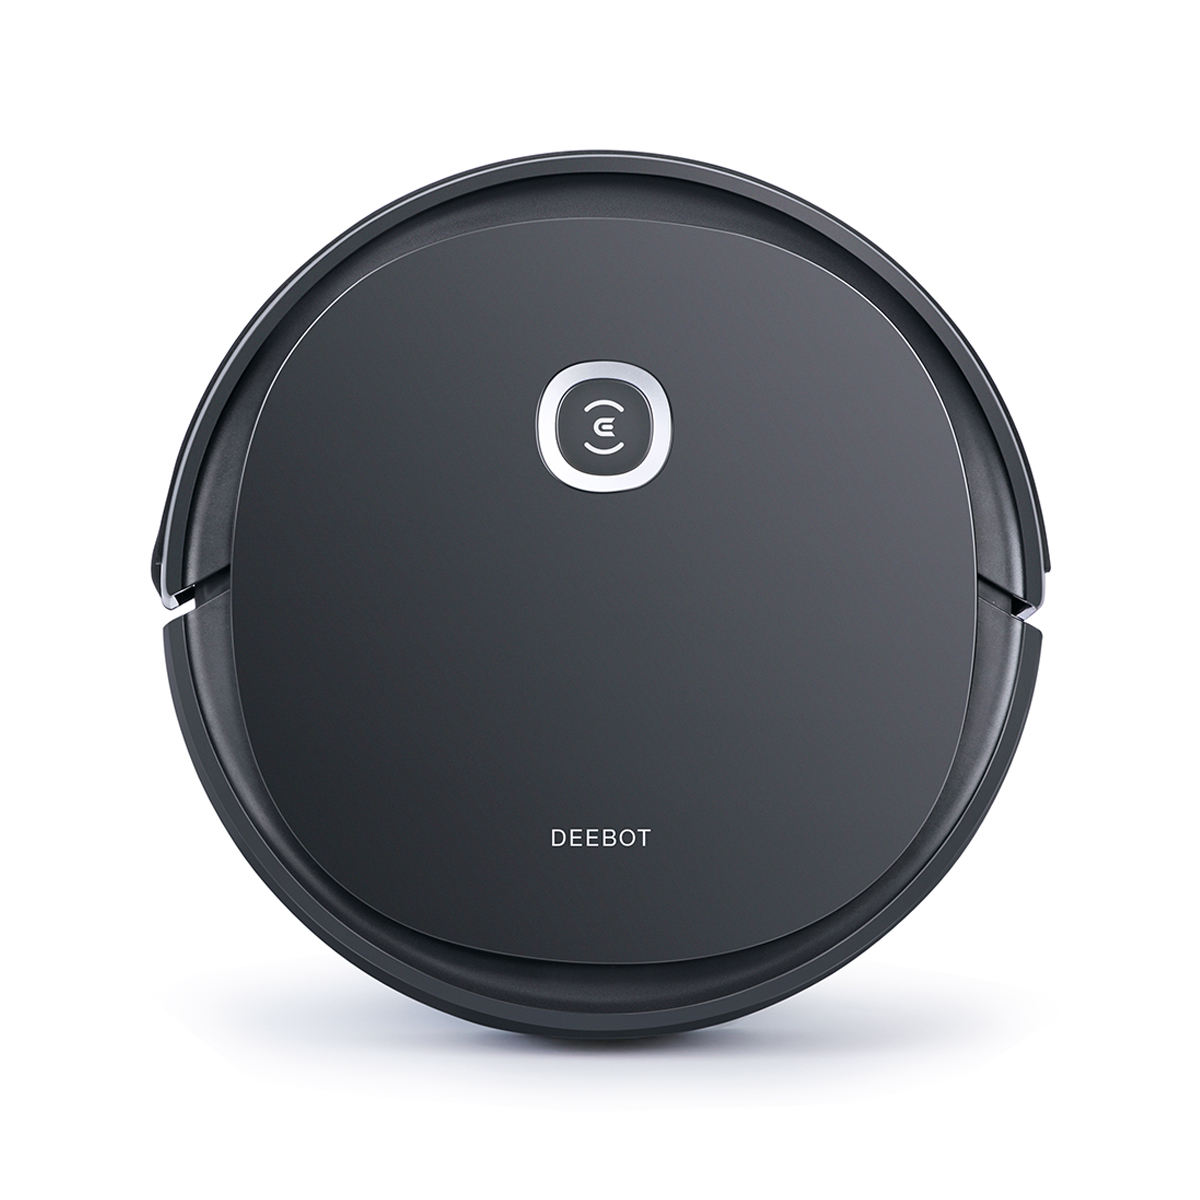 ECOVACS DEEBOT U2 2-in-1 Robot Vacuum Cleaner and Mop with WiFi & App in Black - image 1 of 7